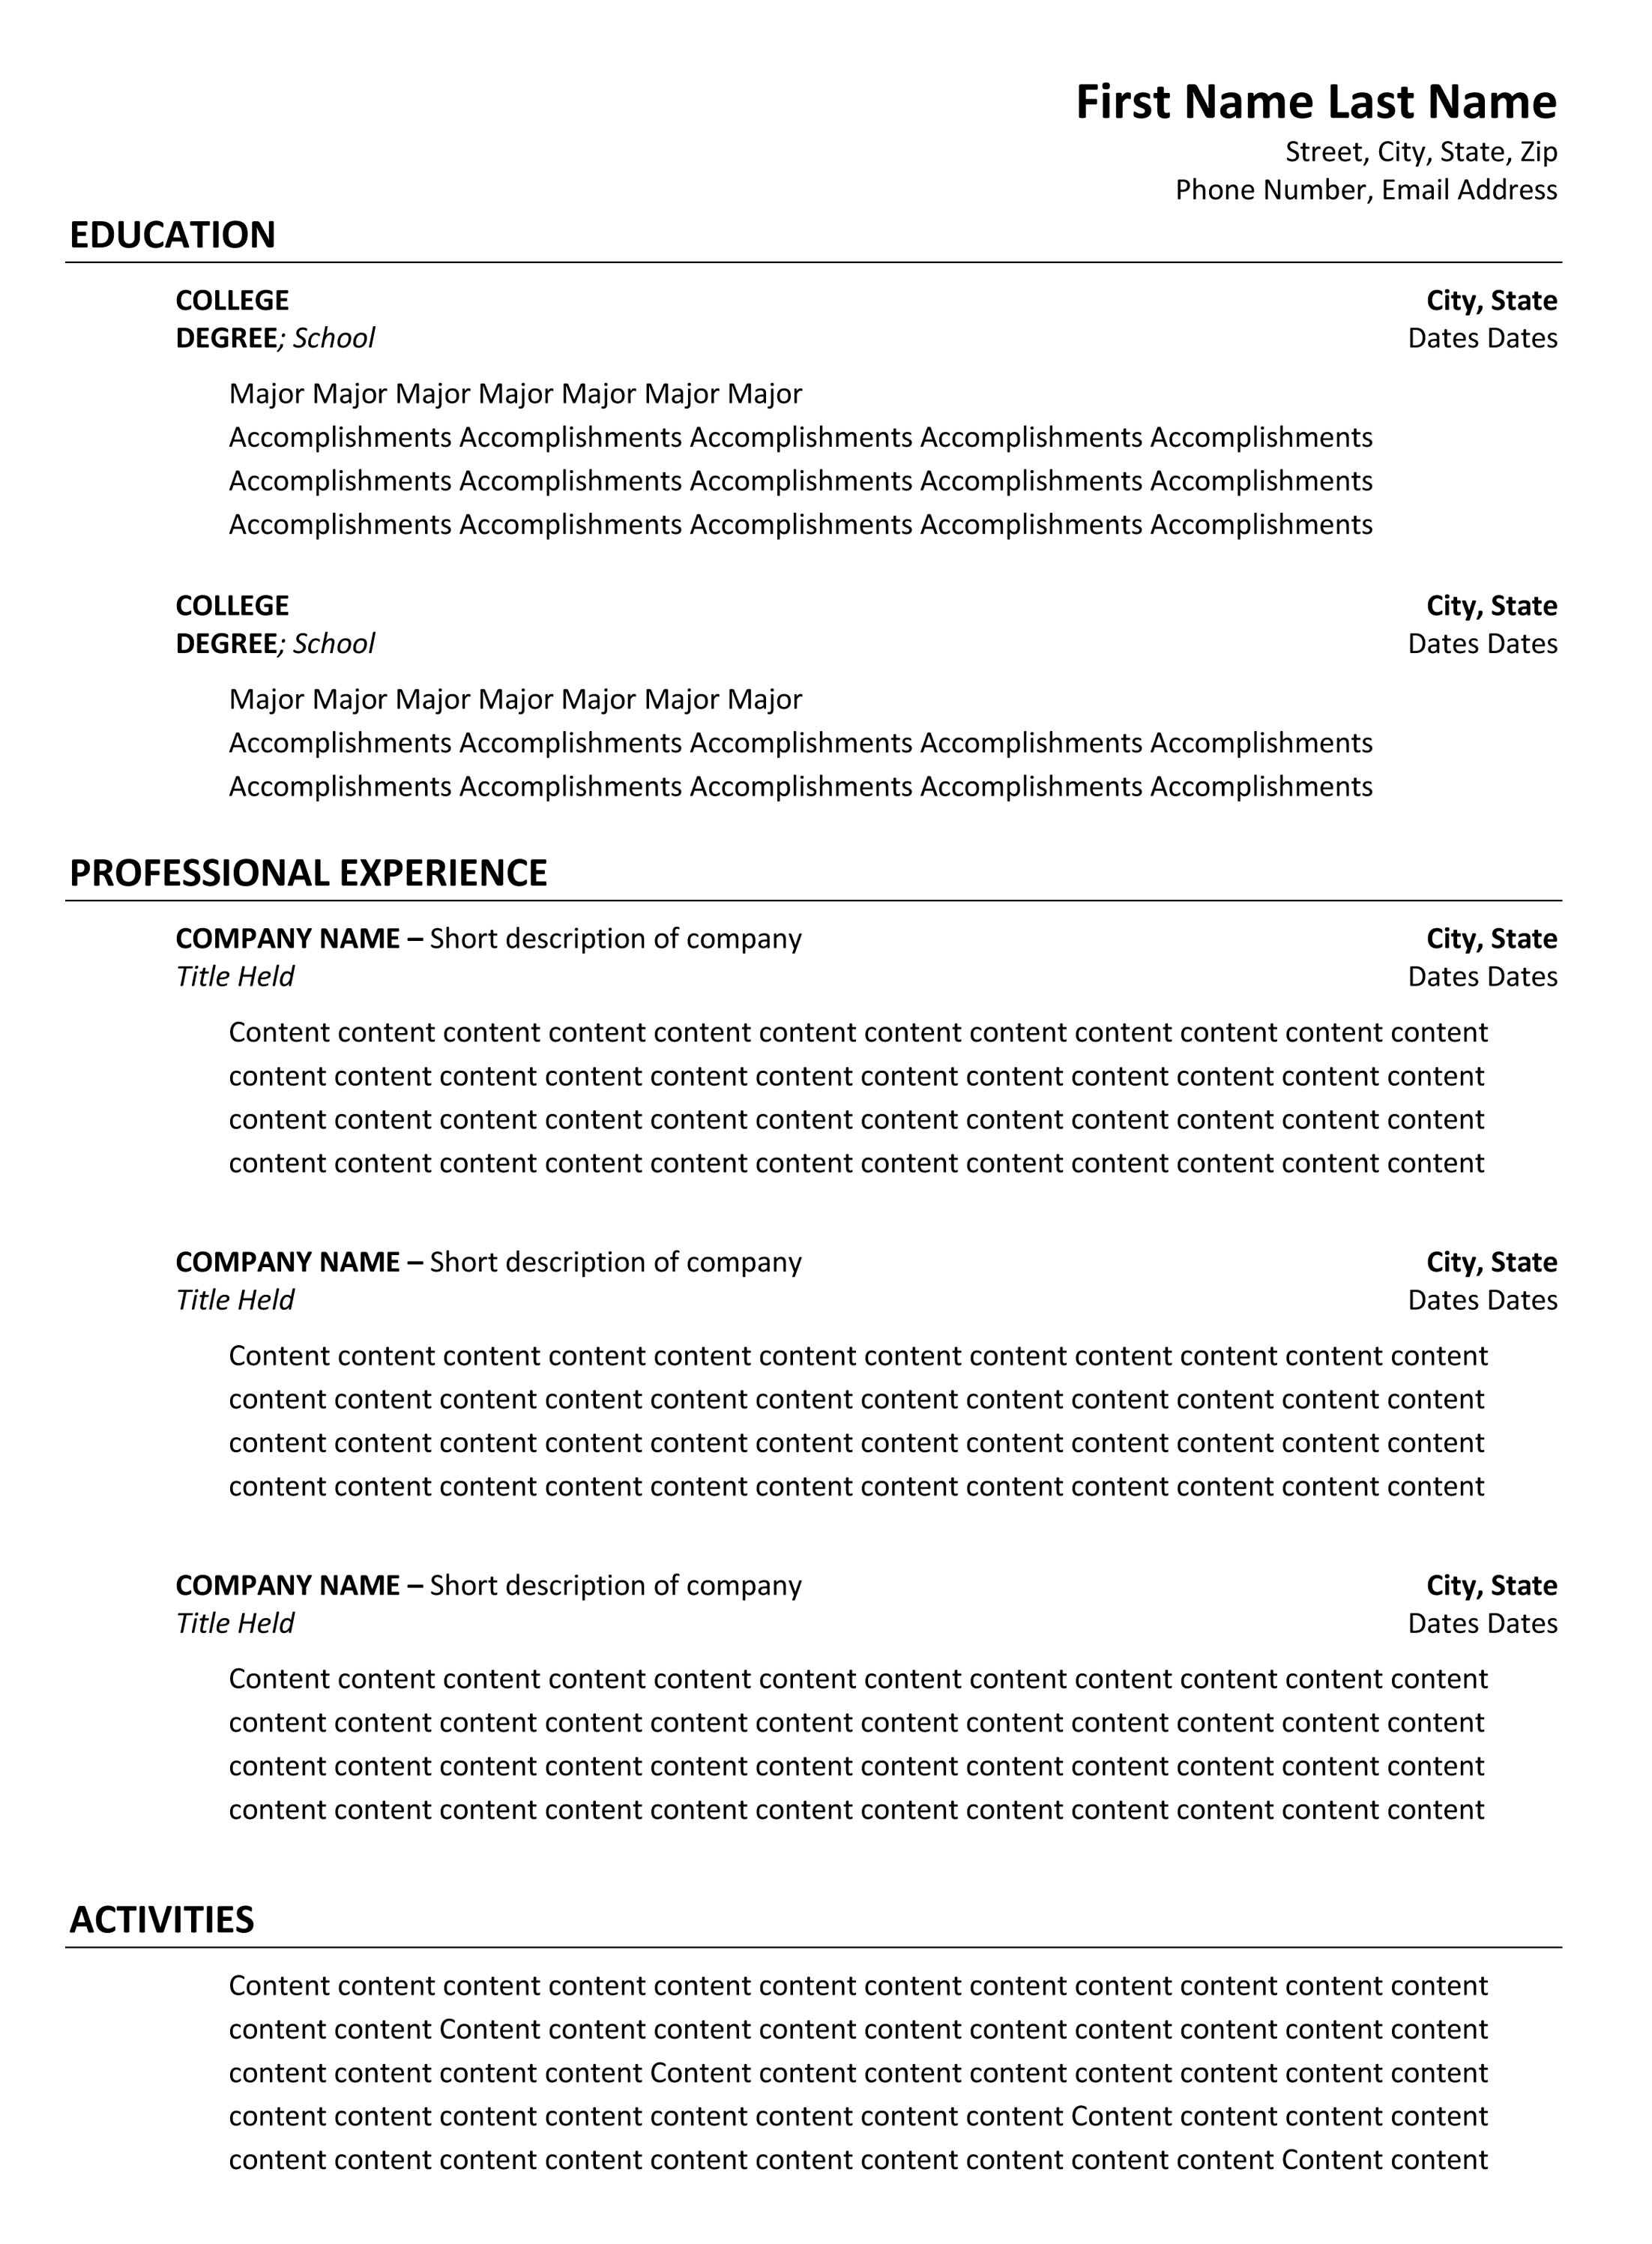 Want to improve your resume for better results?! Focus on WHITE SPACE!